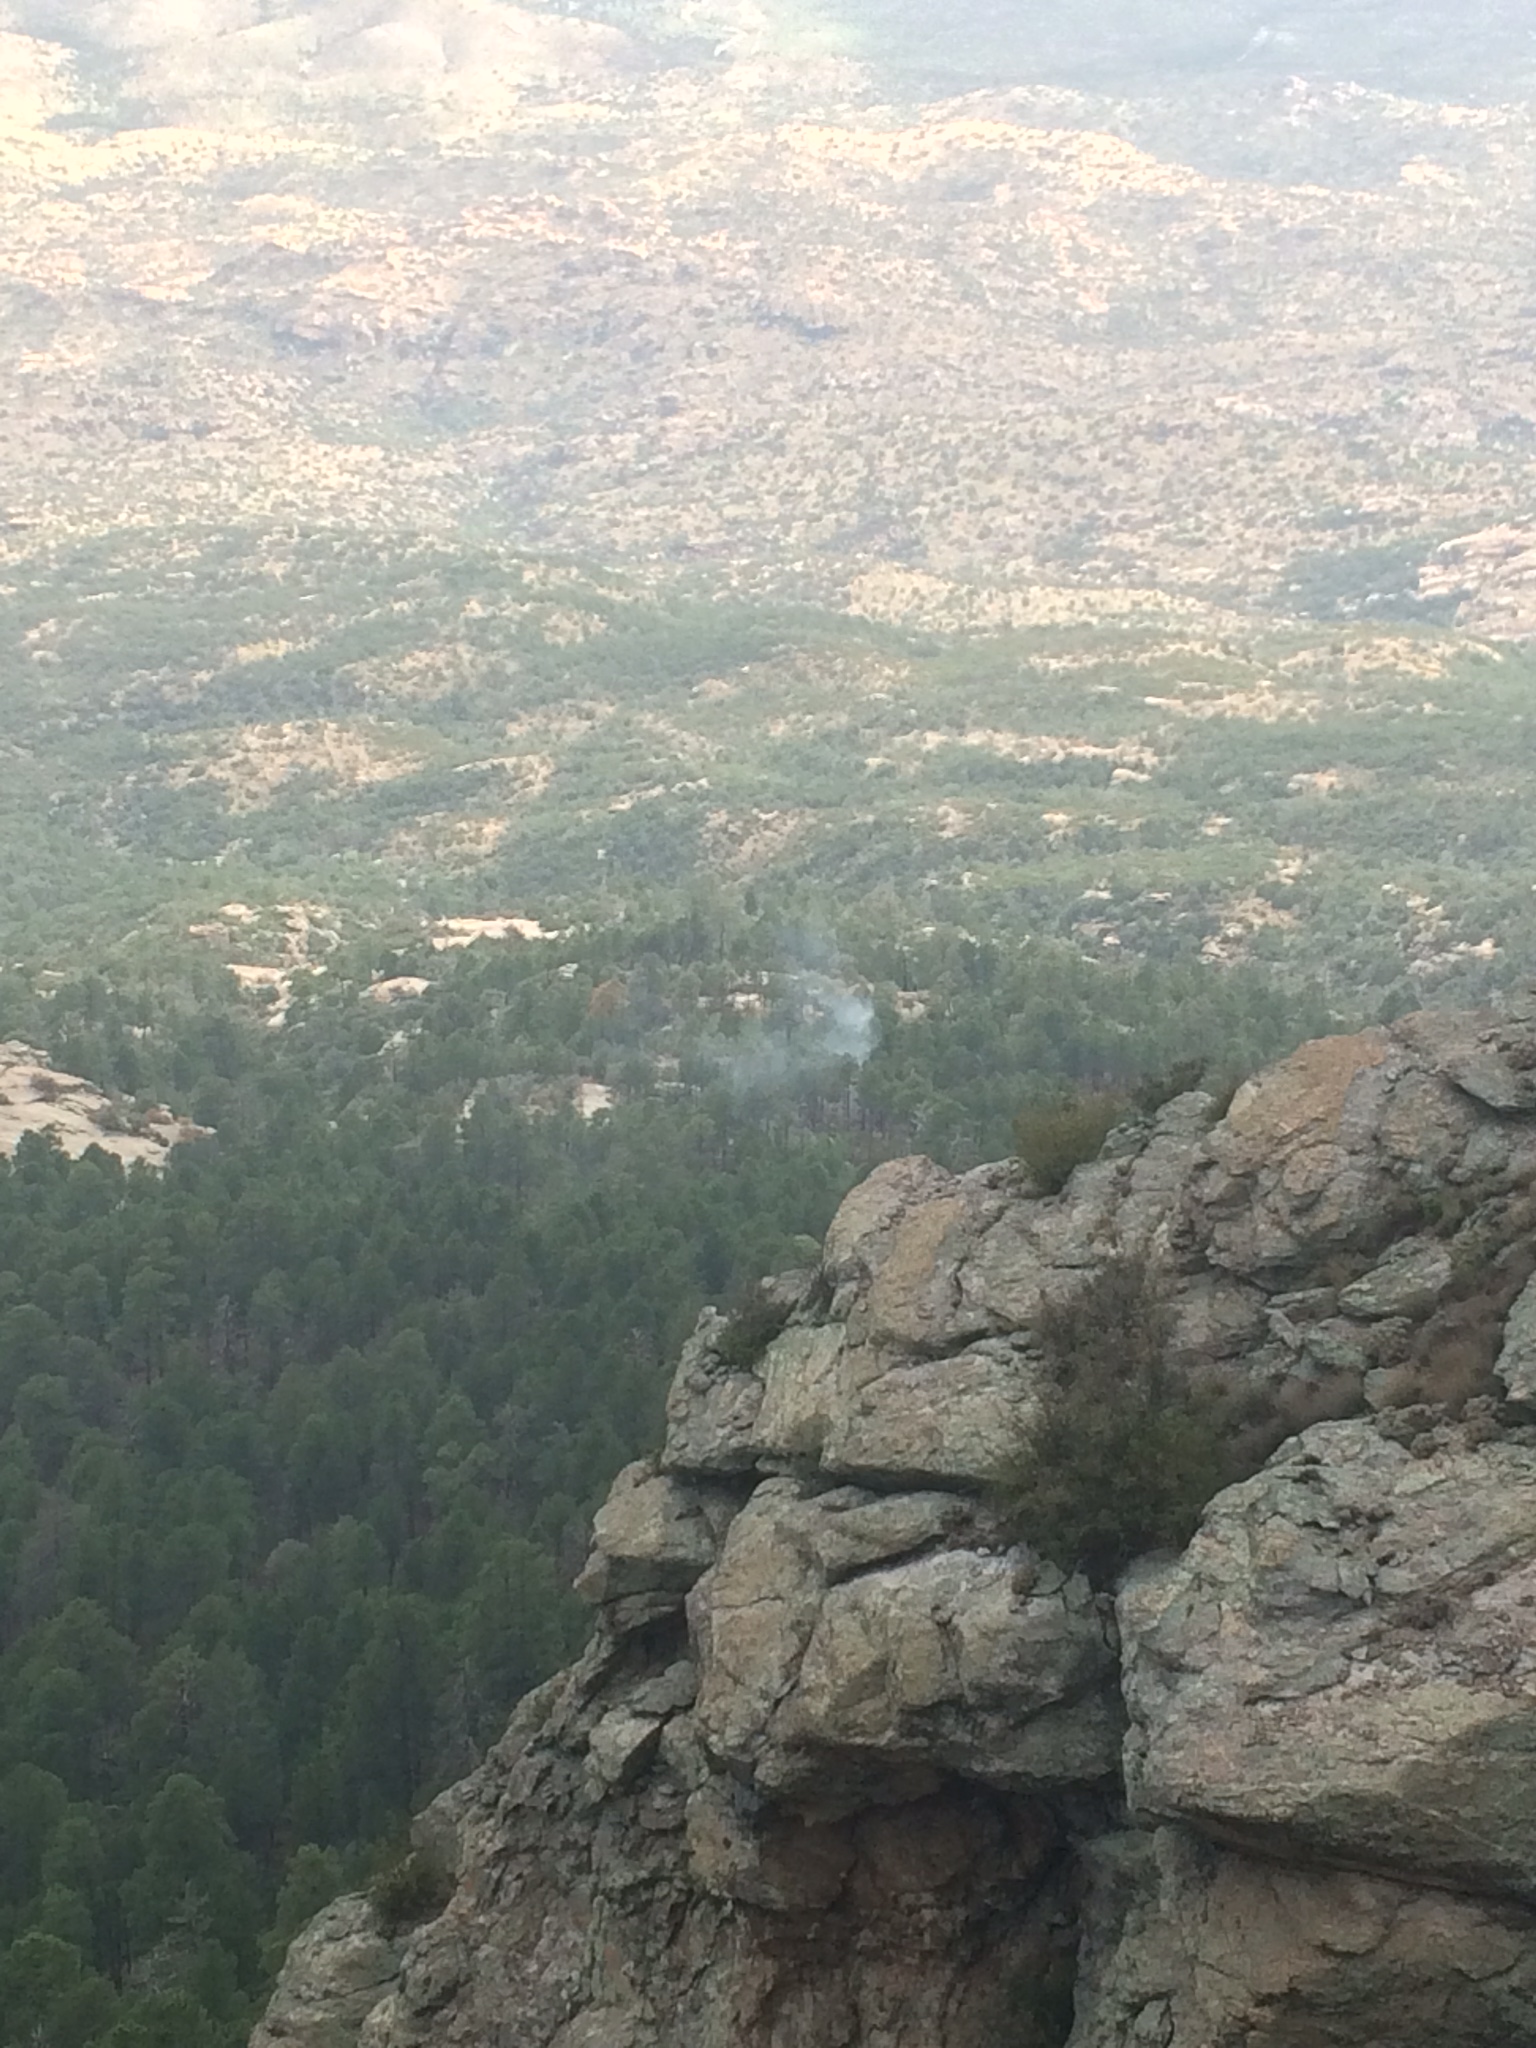 View from Spud Rock of the Spud Rock Fire